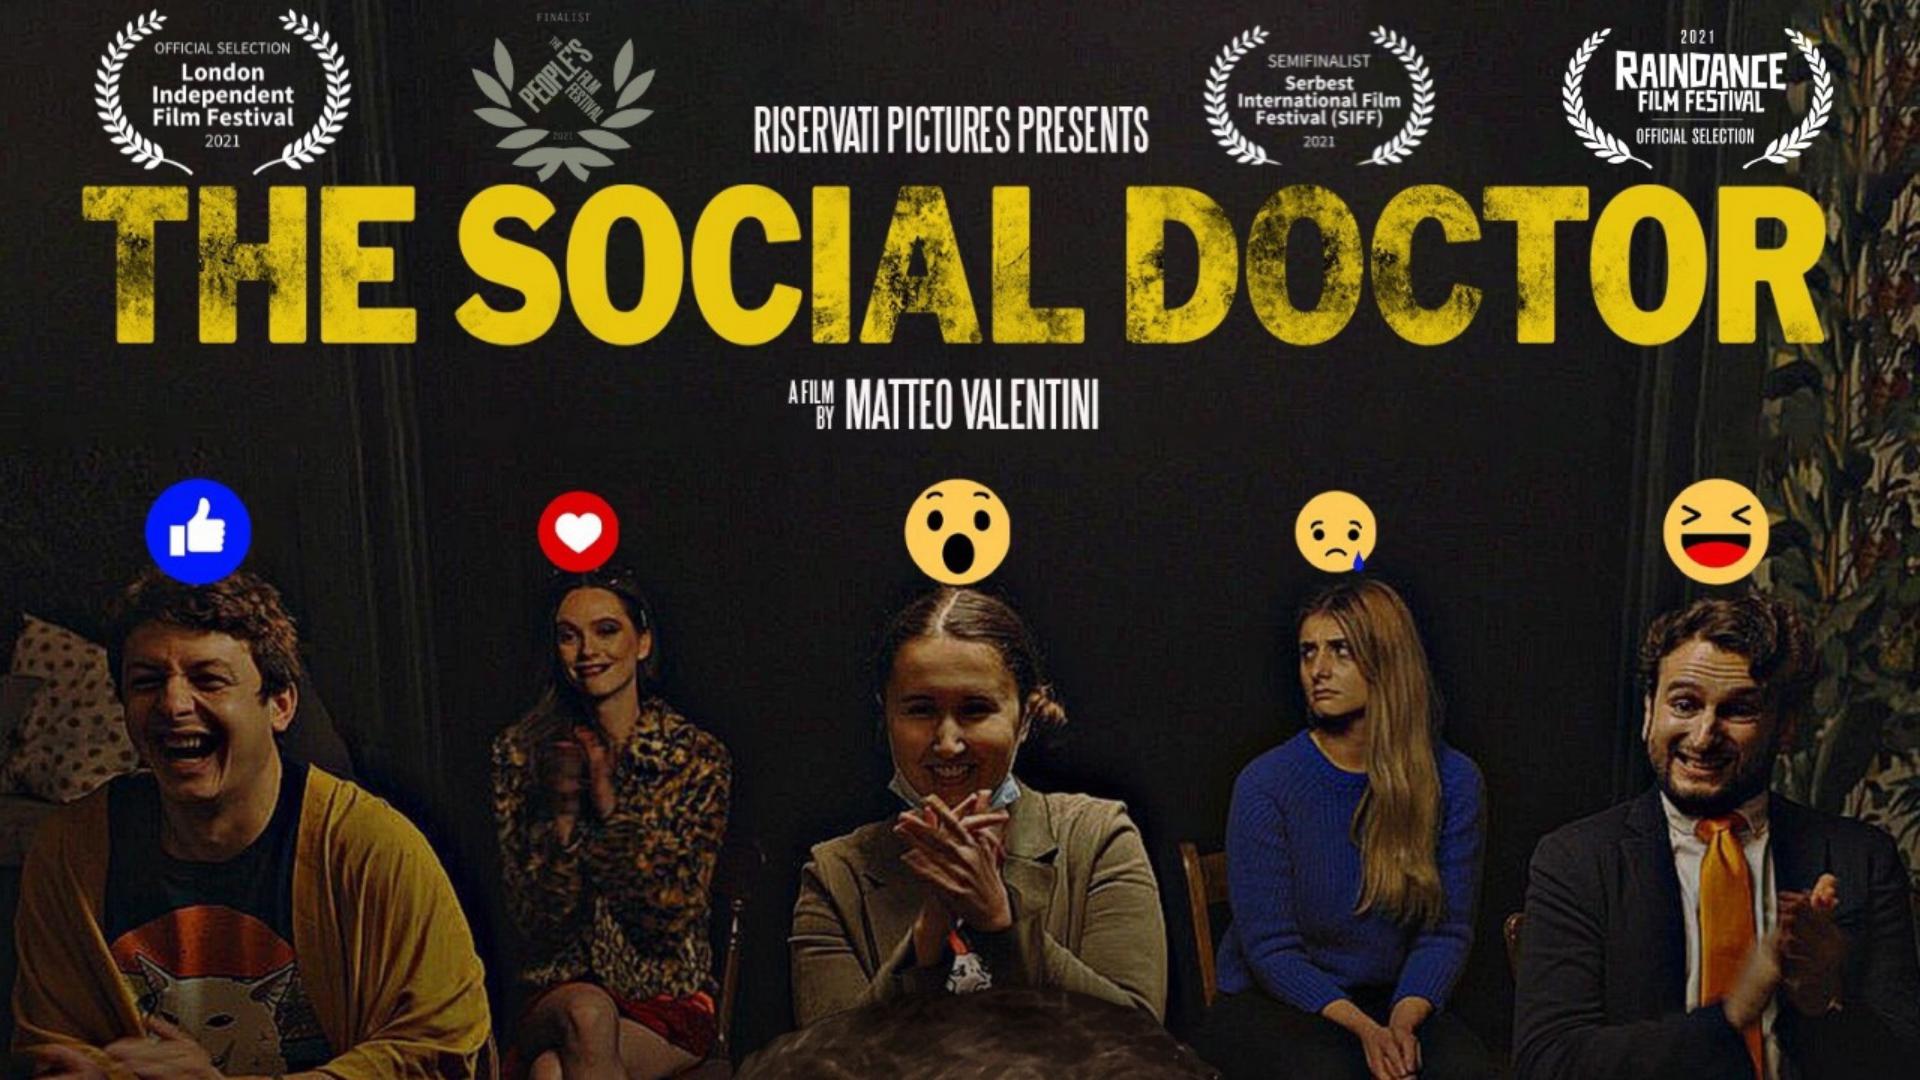 The Social Doctor